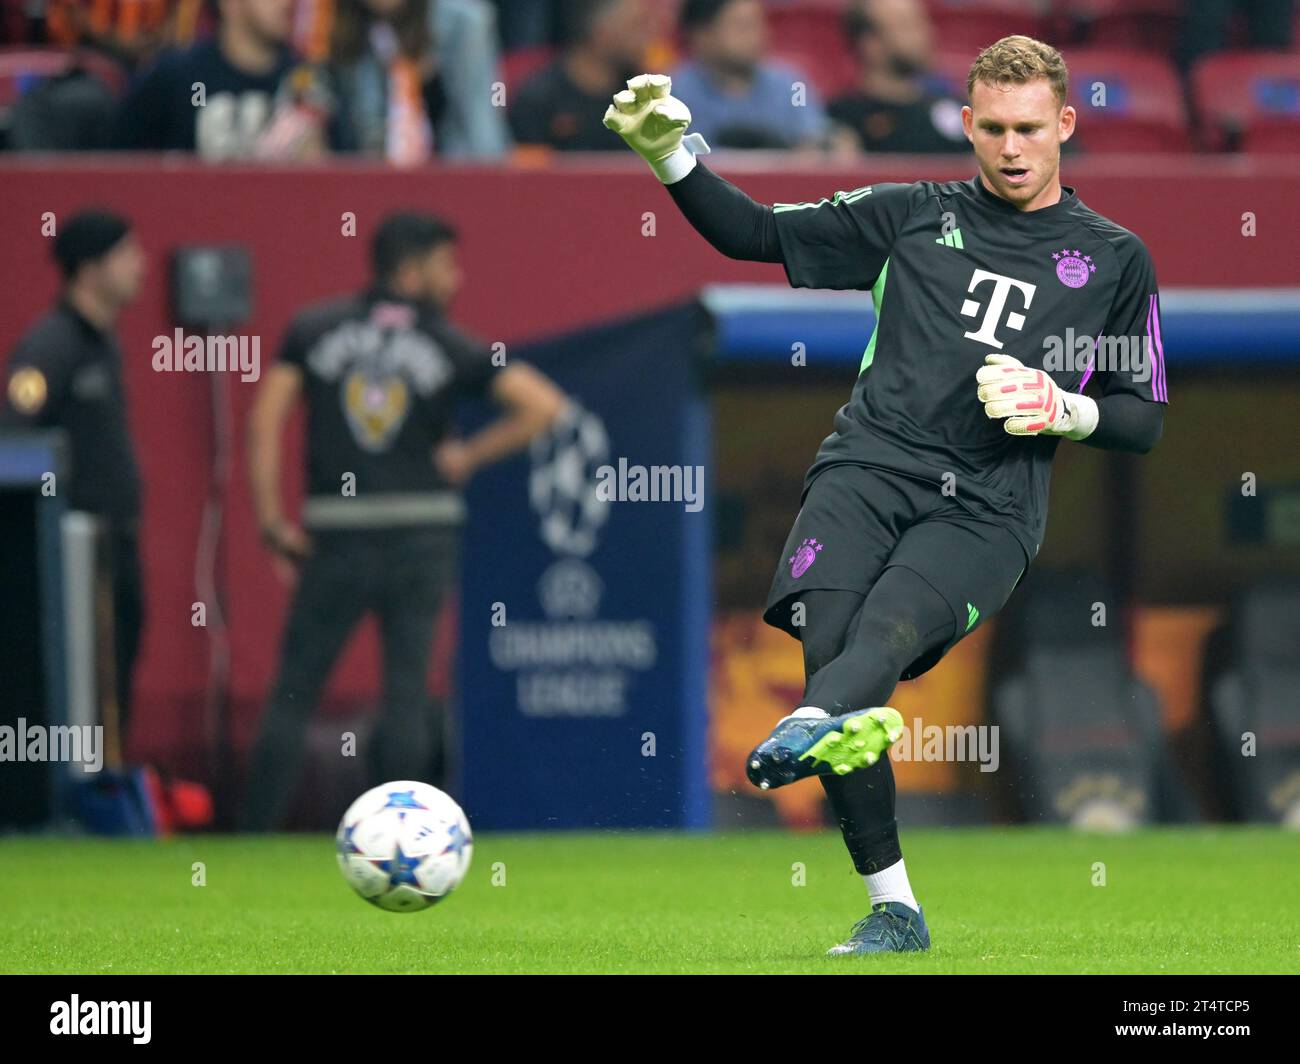 ISTANBUL - FC Bayern Munich goalkeeper Daniel Peretz during the UEFA Champions League Group A match between Galatasaray and FC Bayern Munich at the Rams Global Stadium on October 24 in Istanbul, Turkey. ANP | Hollandse Hoogte | GERRIT VAN COLOGNE Stock Photo